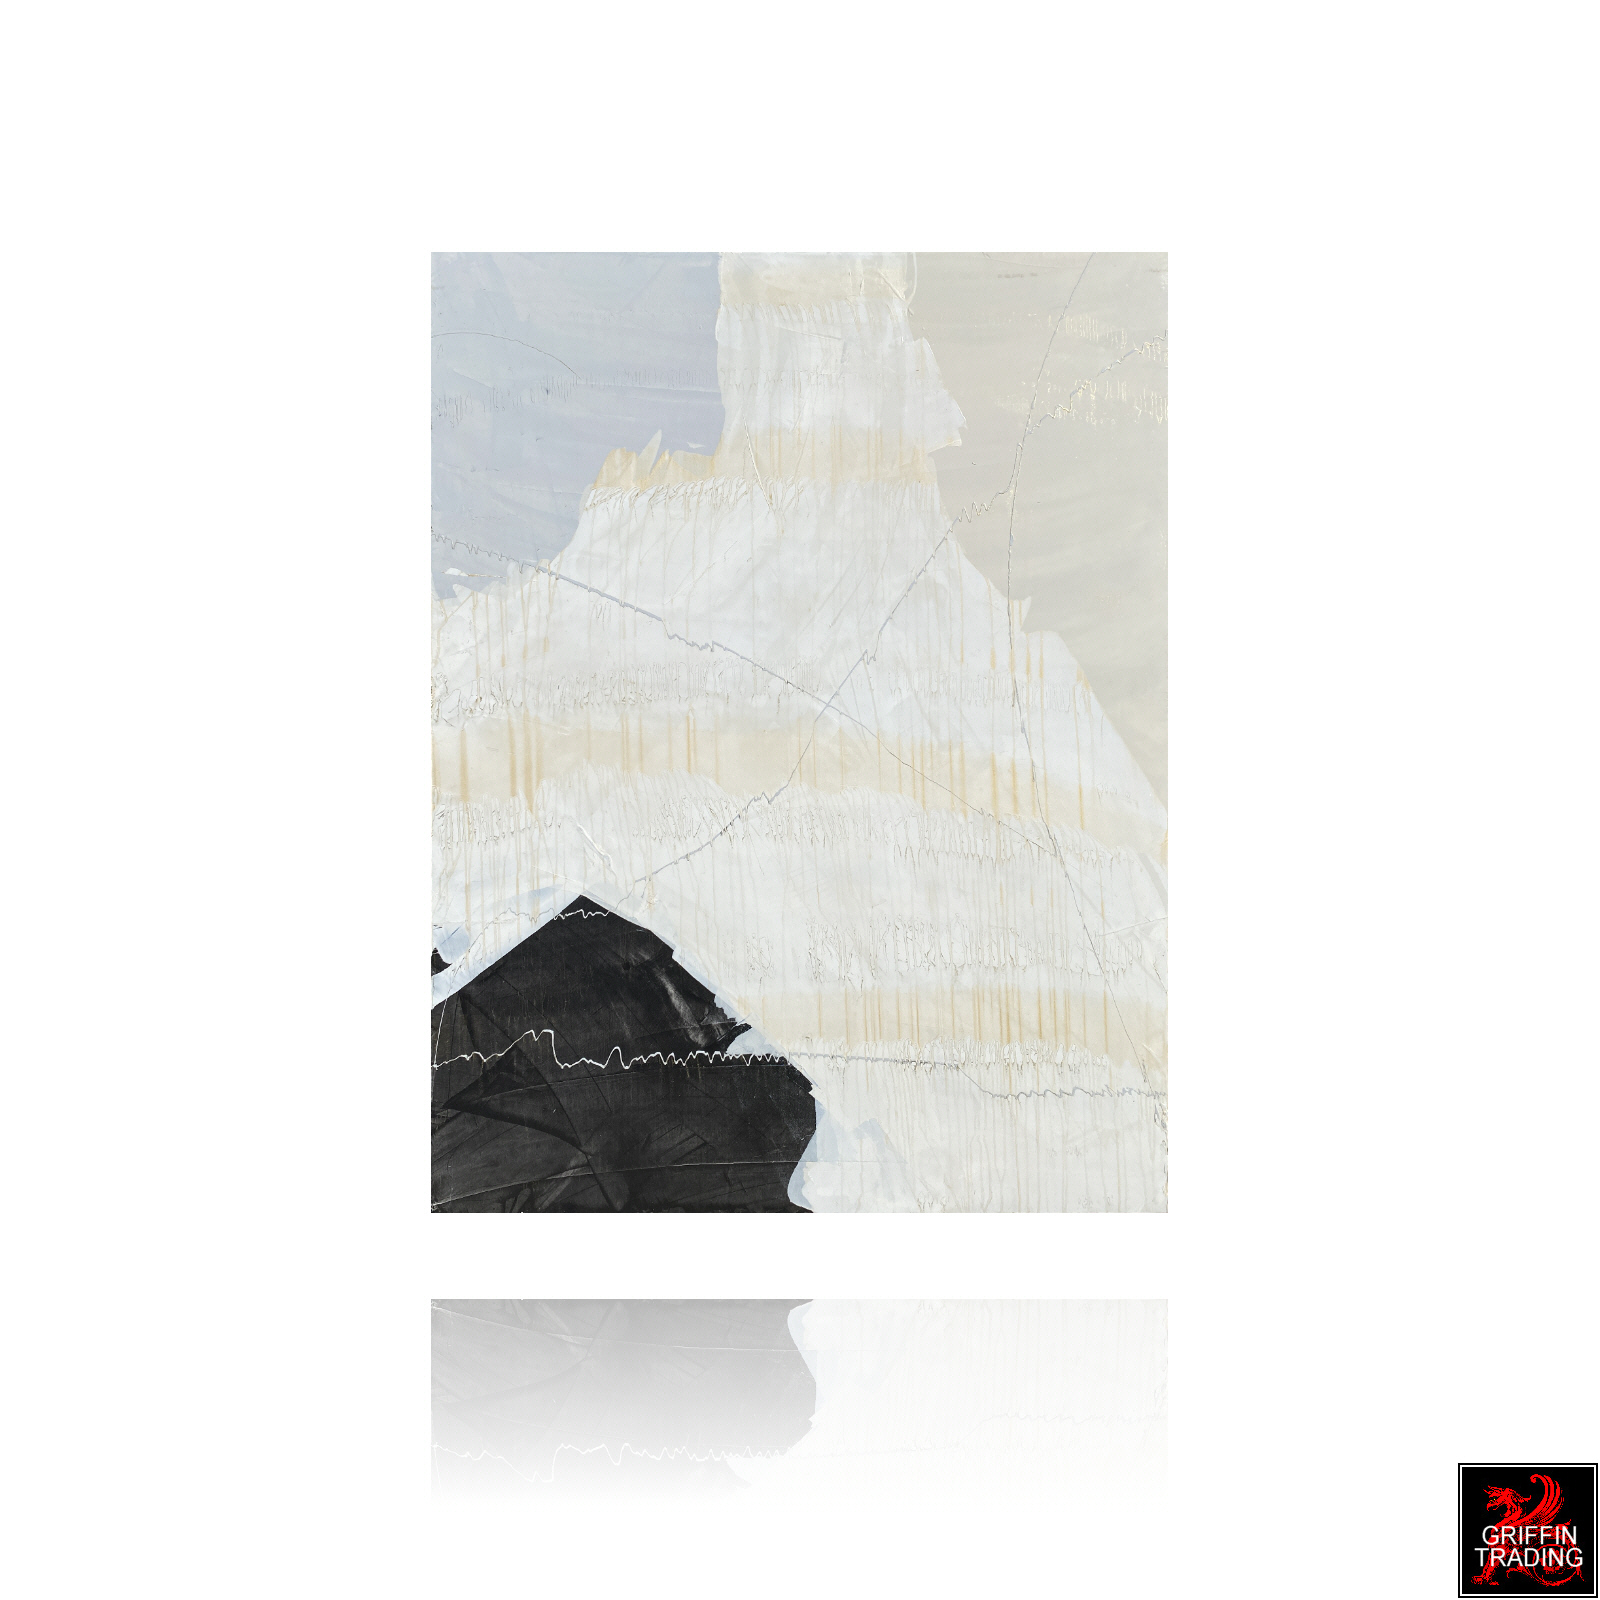 Untitled abstract painting 8386 is an original artwork by Austin Allen James.